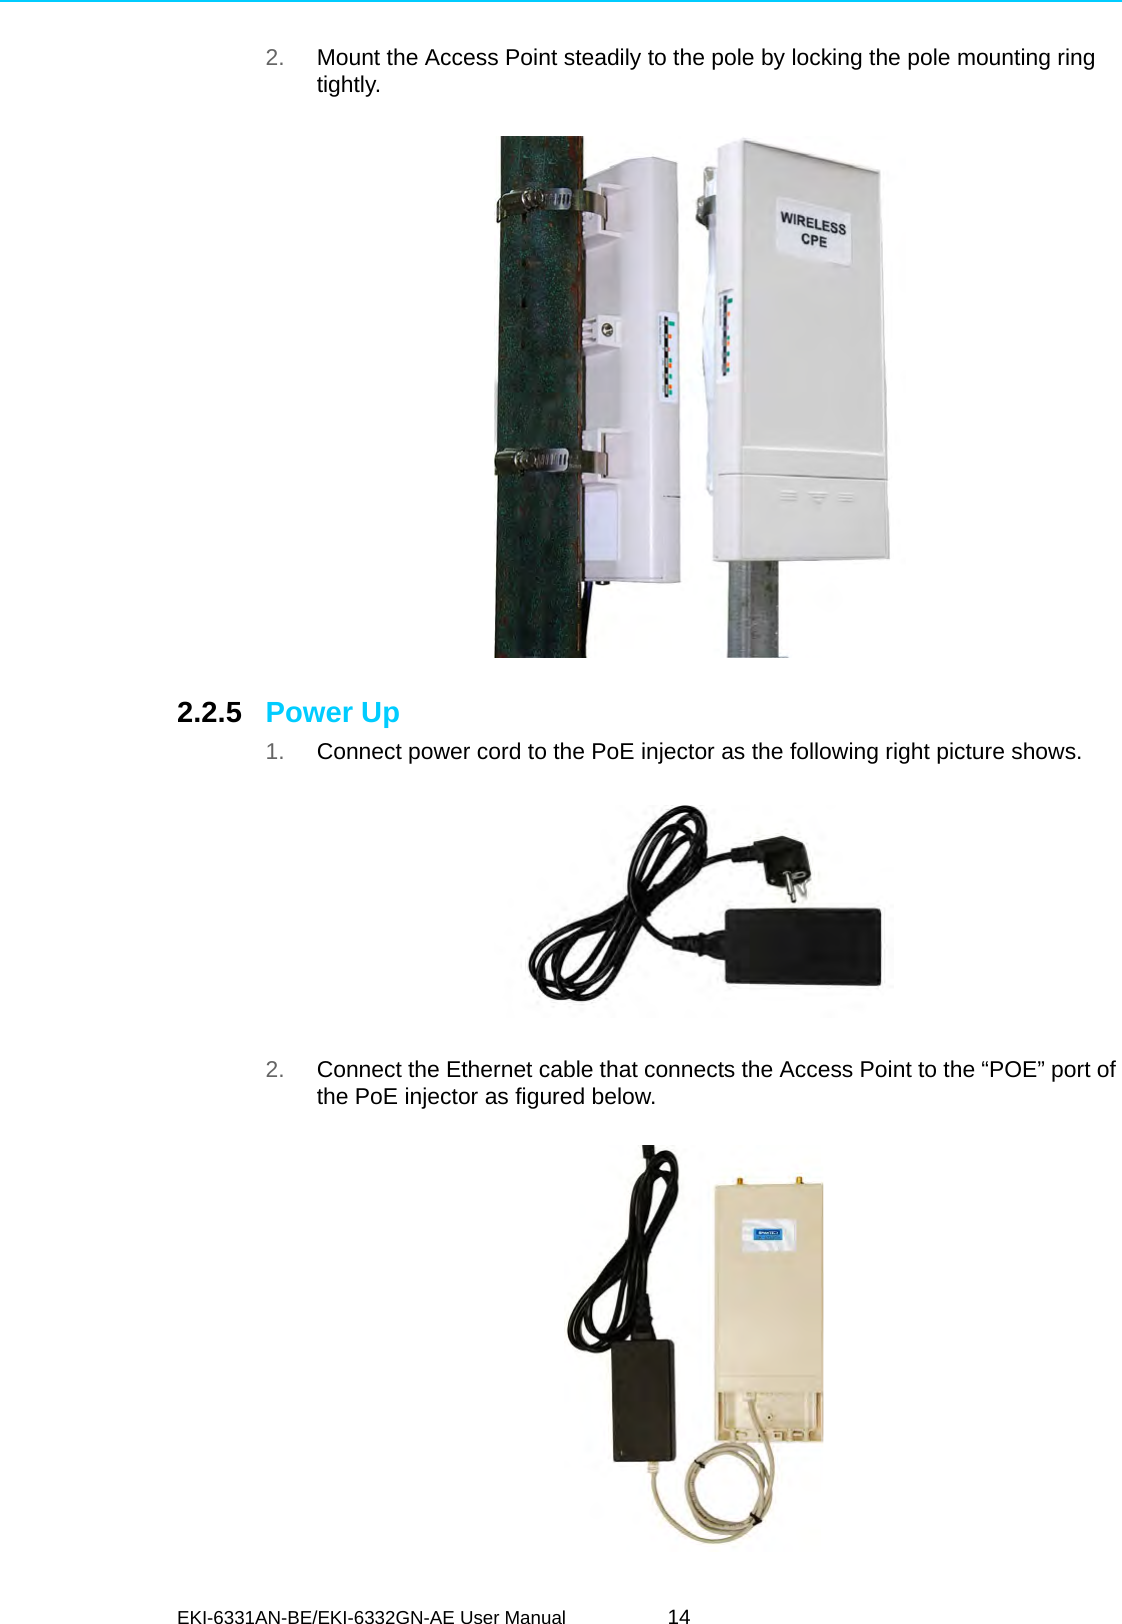 EKI-6331AN-BE/EKI-6332GN-AE User Manual 142. Mount the Access Point steadily to the pole by locking the pole mounting ring tightly.      2.2.5 Power Up 1. Connect power cord to the PoE injector as the following right picture shows. 2. Connect the Ethernet cable that connects the Access Point to the “POE” port of the PoE injector as figured below.  